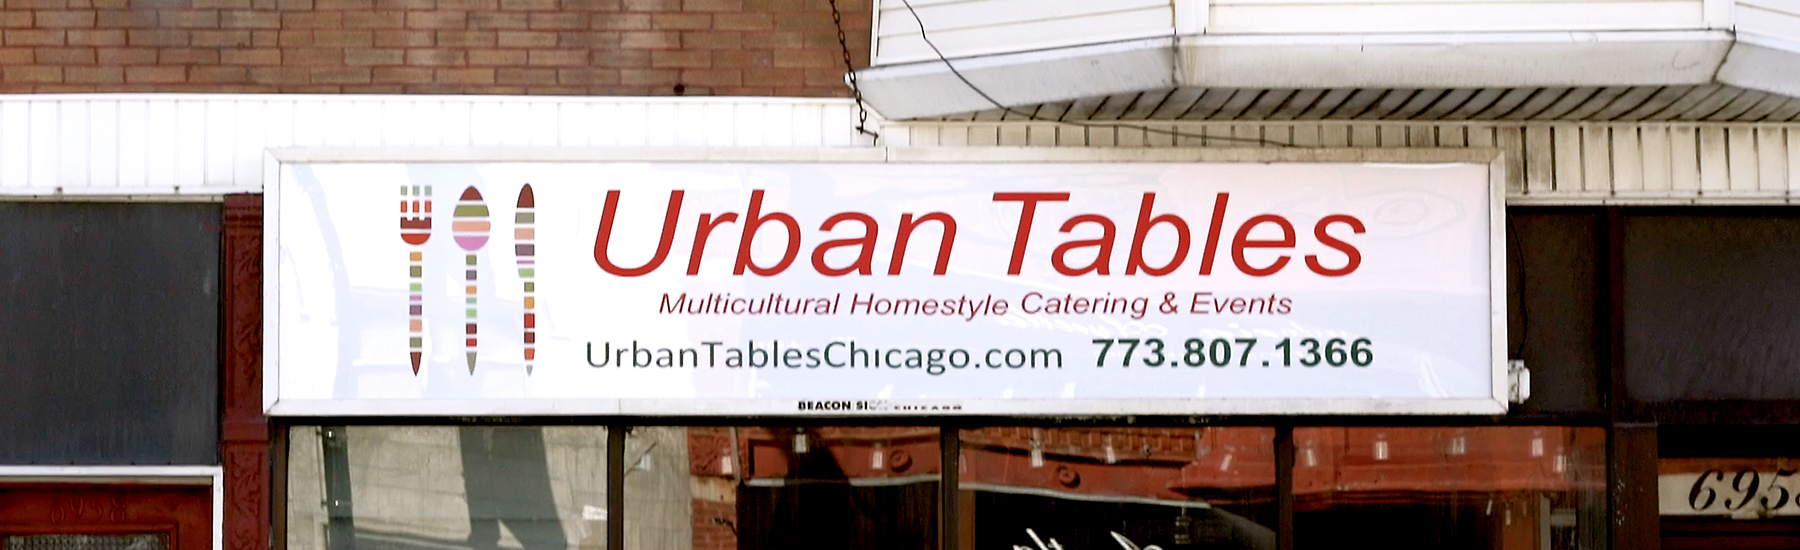 Chicago small business Urban Tables storefront sign